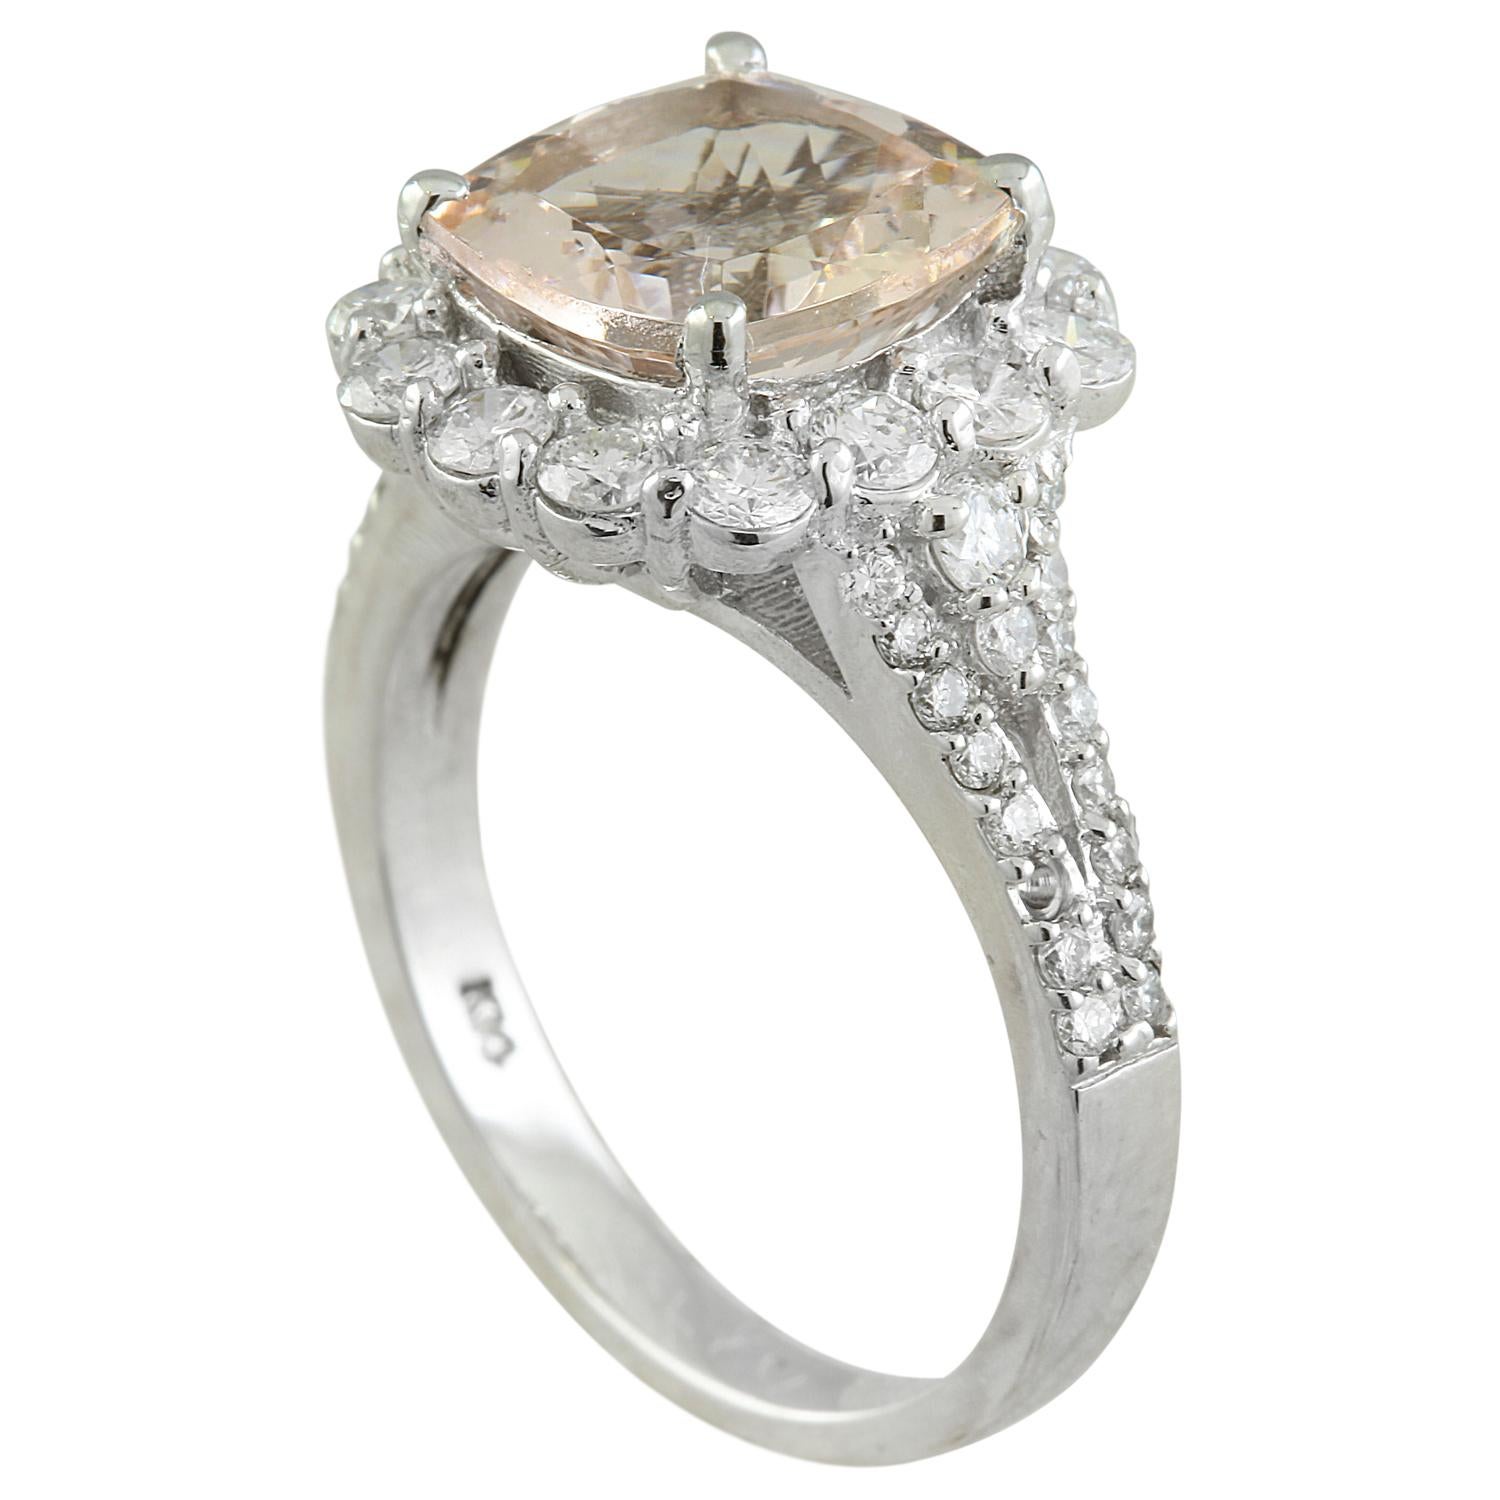 3.70 Carat Natural Morganite 14 Karat Solid White Gold Diamond Ring
Stamped: 14K 
Total Ring Weight: 5 Grams 
Morganite Weight: 2.60 Carat (9.00x9.00 Millimeters)  
Diamond Weight: 1.10 Carat (F-G Color, VS2-SI1 Clarity) 
Quantity: 50
Face Measures: